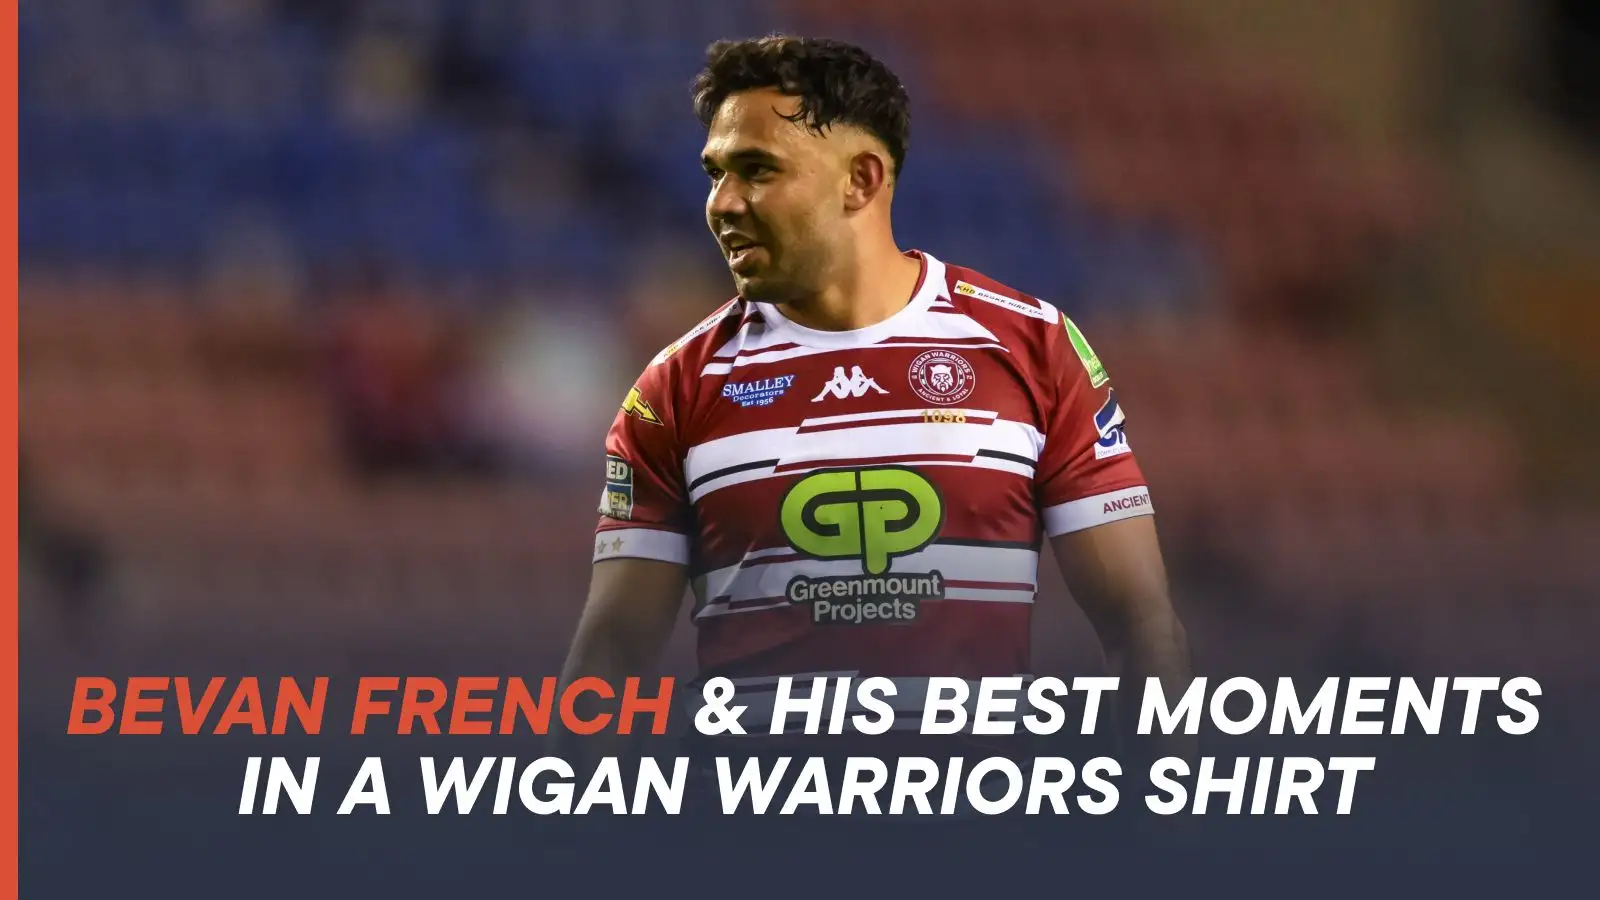 Bevan French and his 5 best moments at Wigan Warriors, including incredible try record